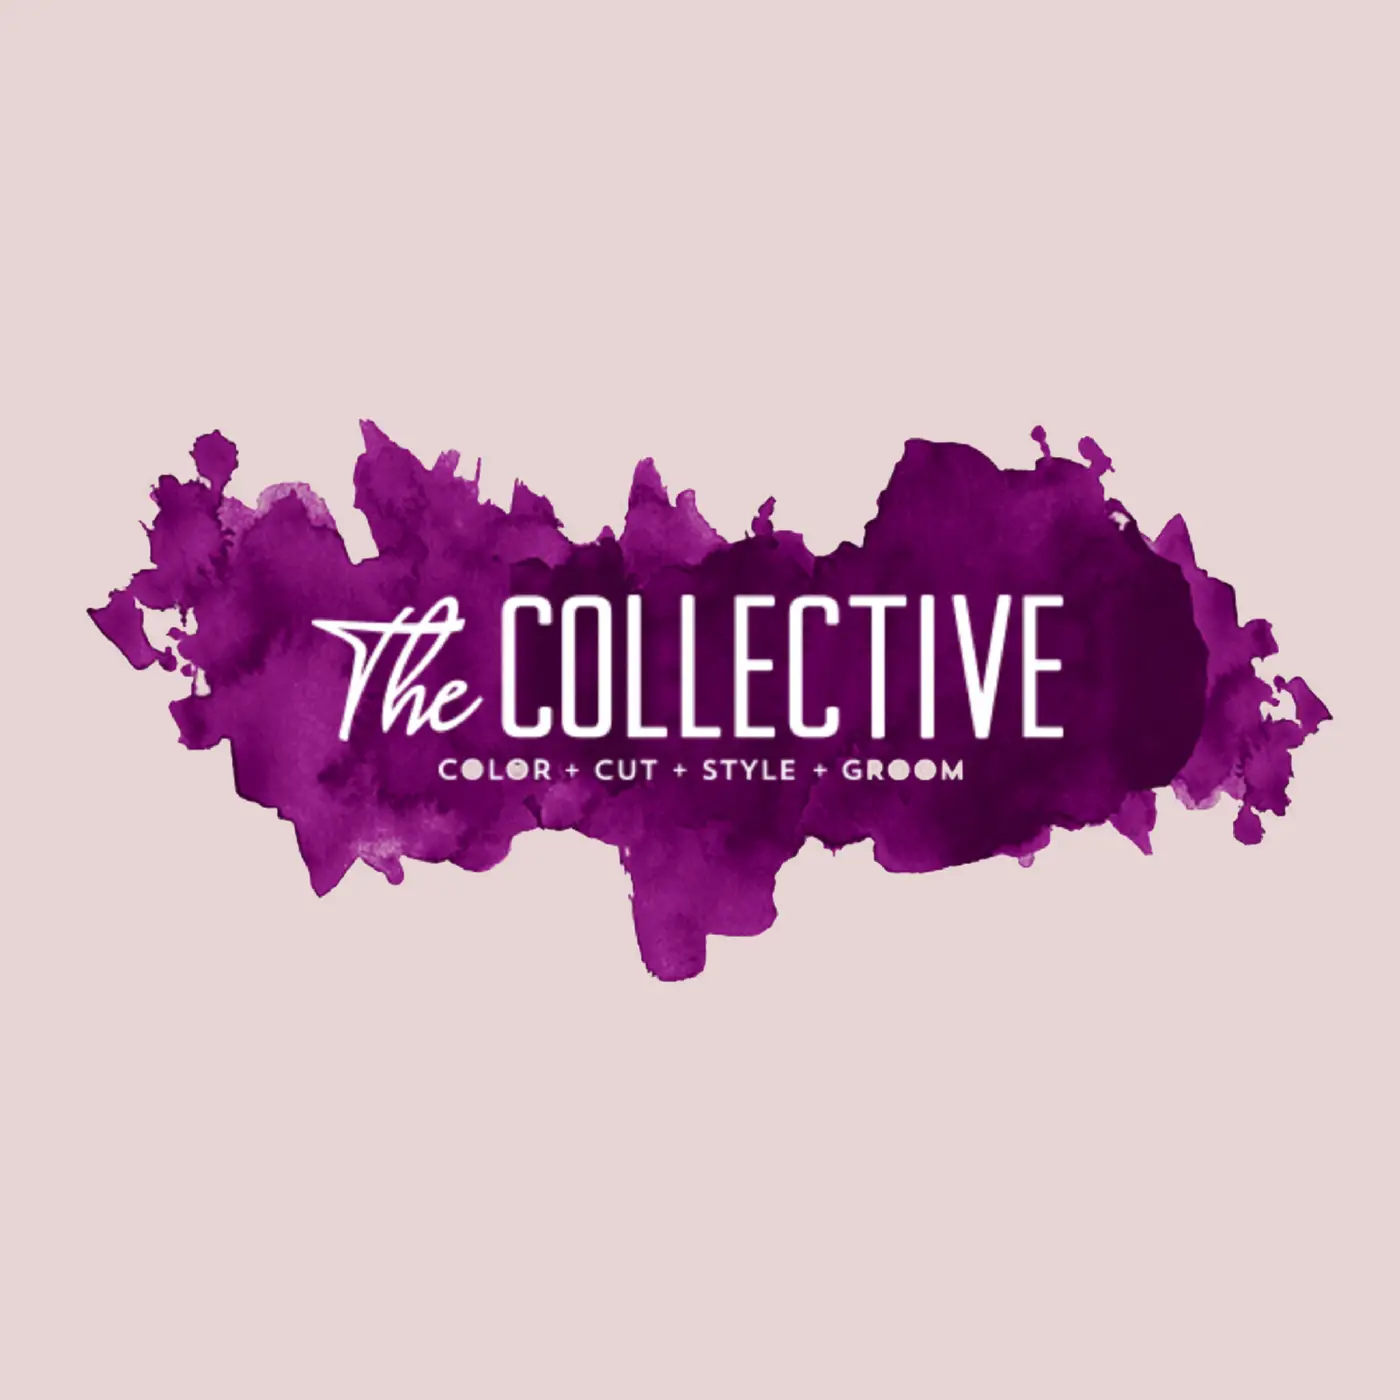 Business logo of The Collective